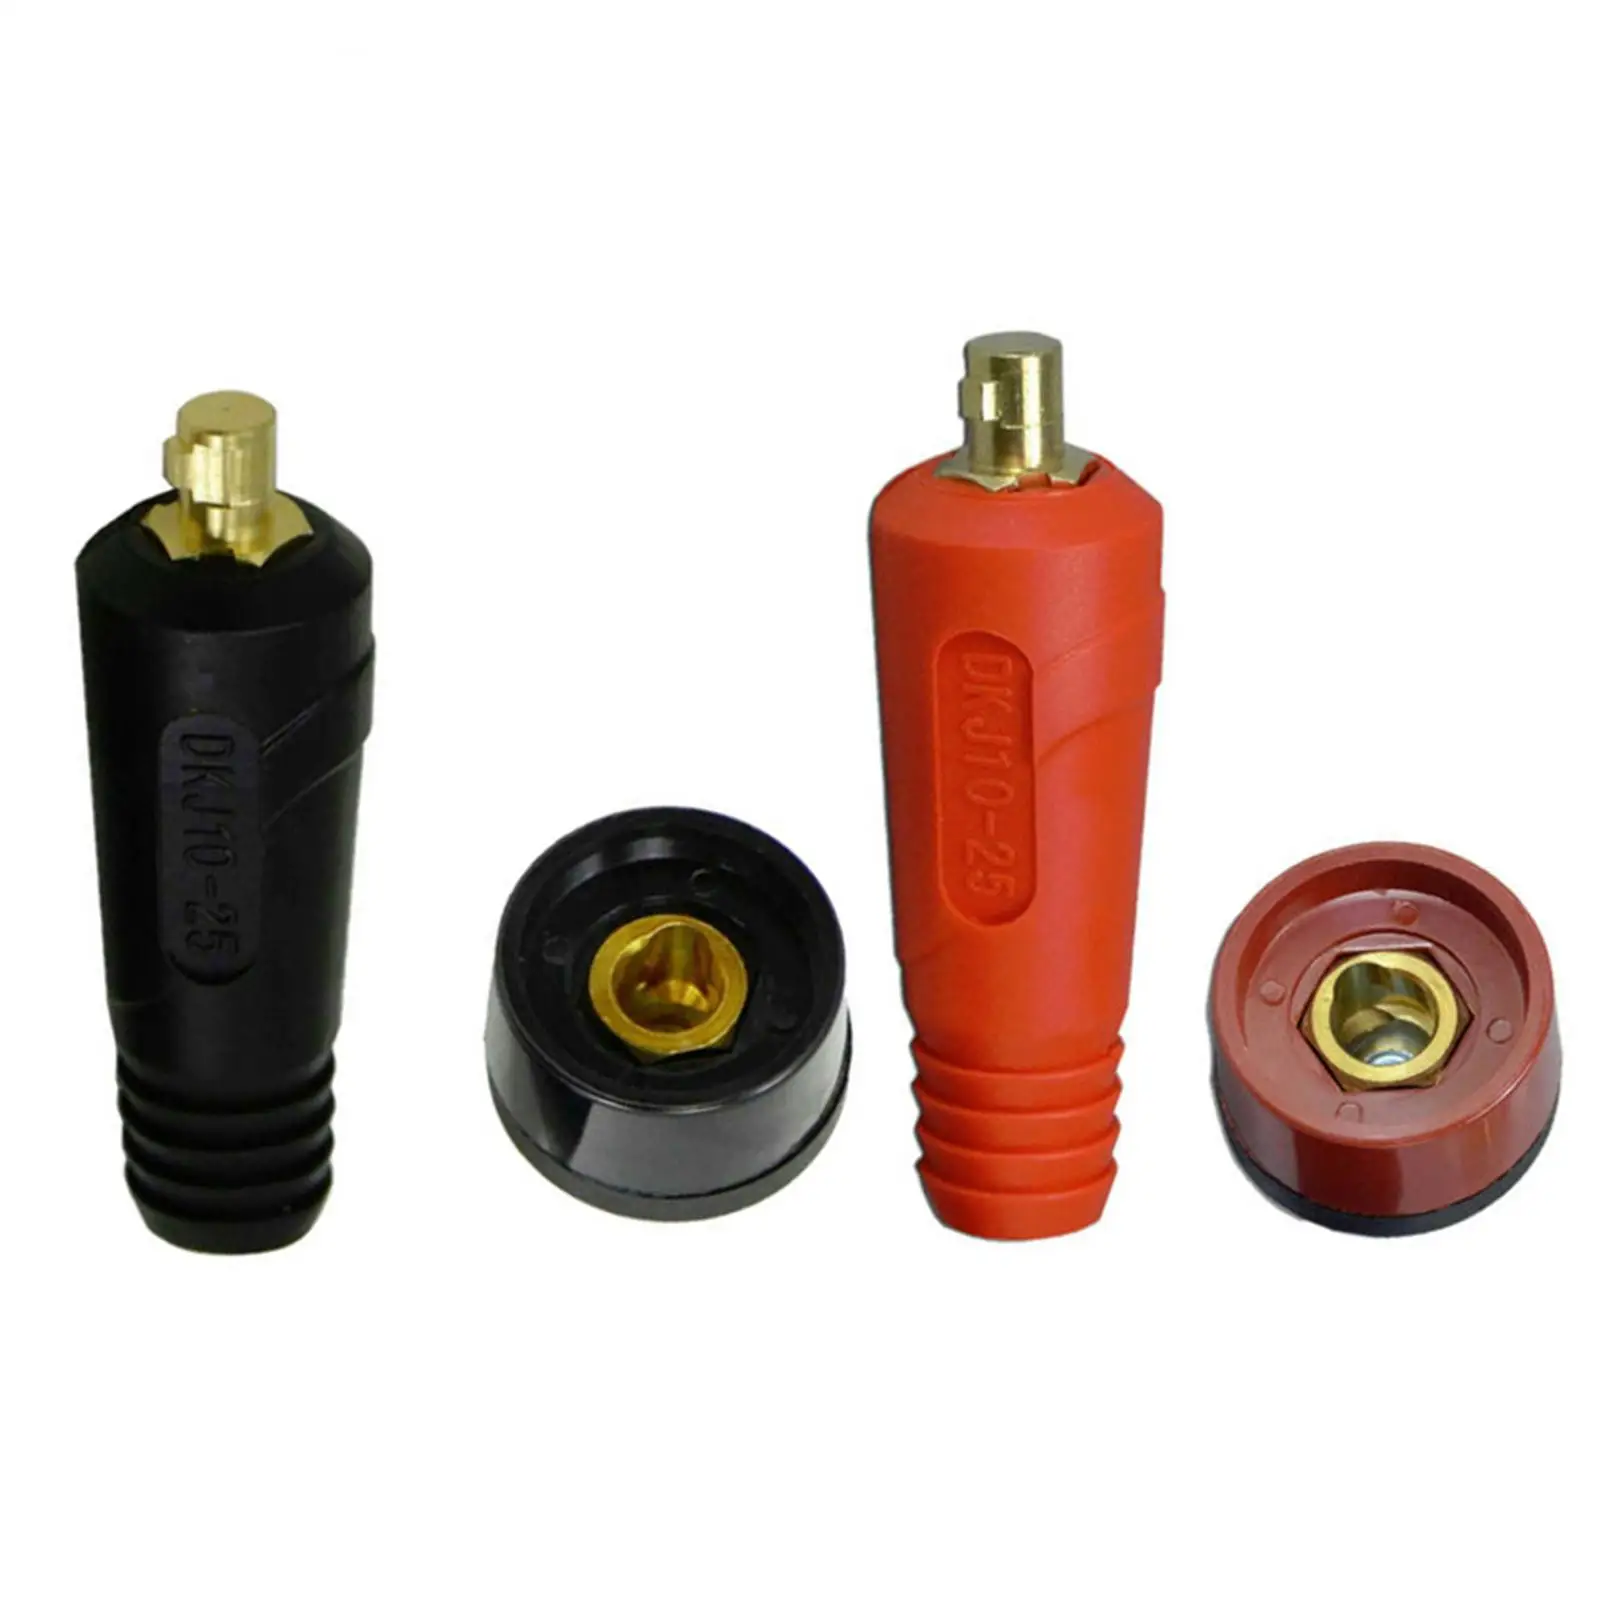 TIG Welding Cable Panel Connector Plug Socket Welding Soldering Tools Quick Connect Connector